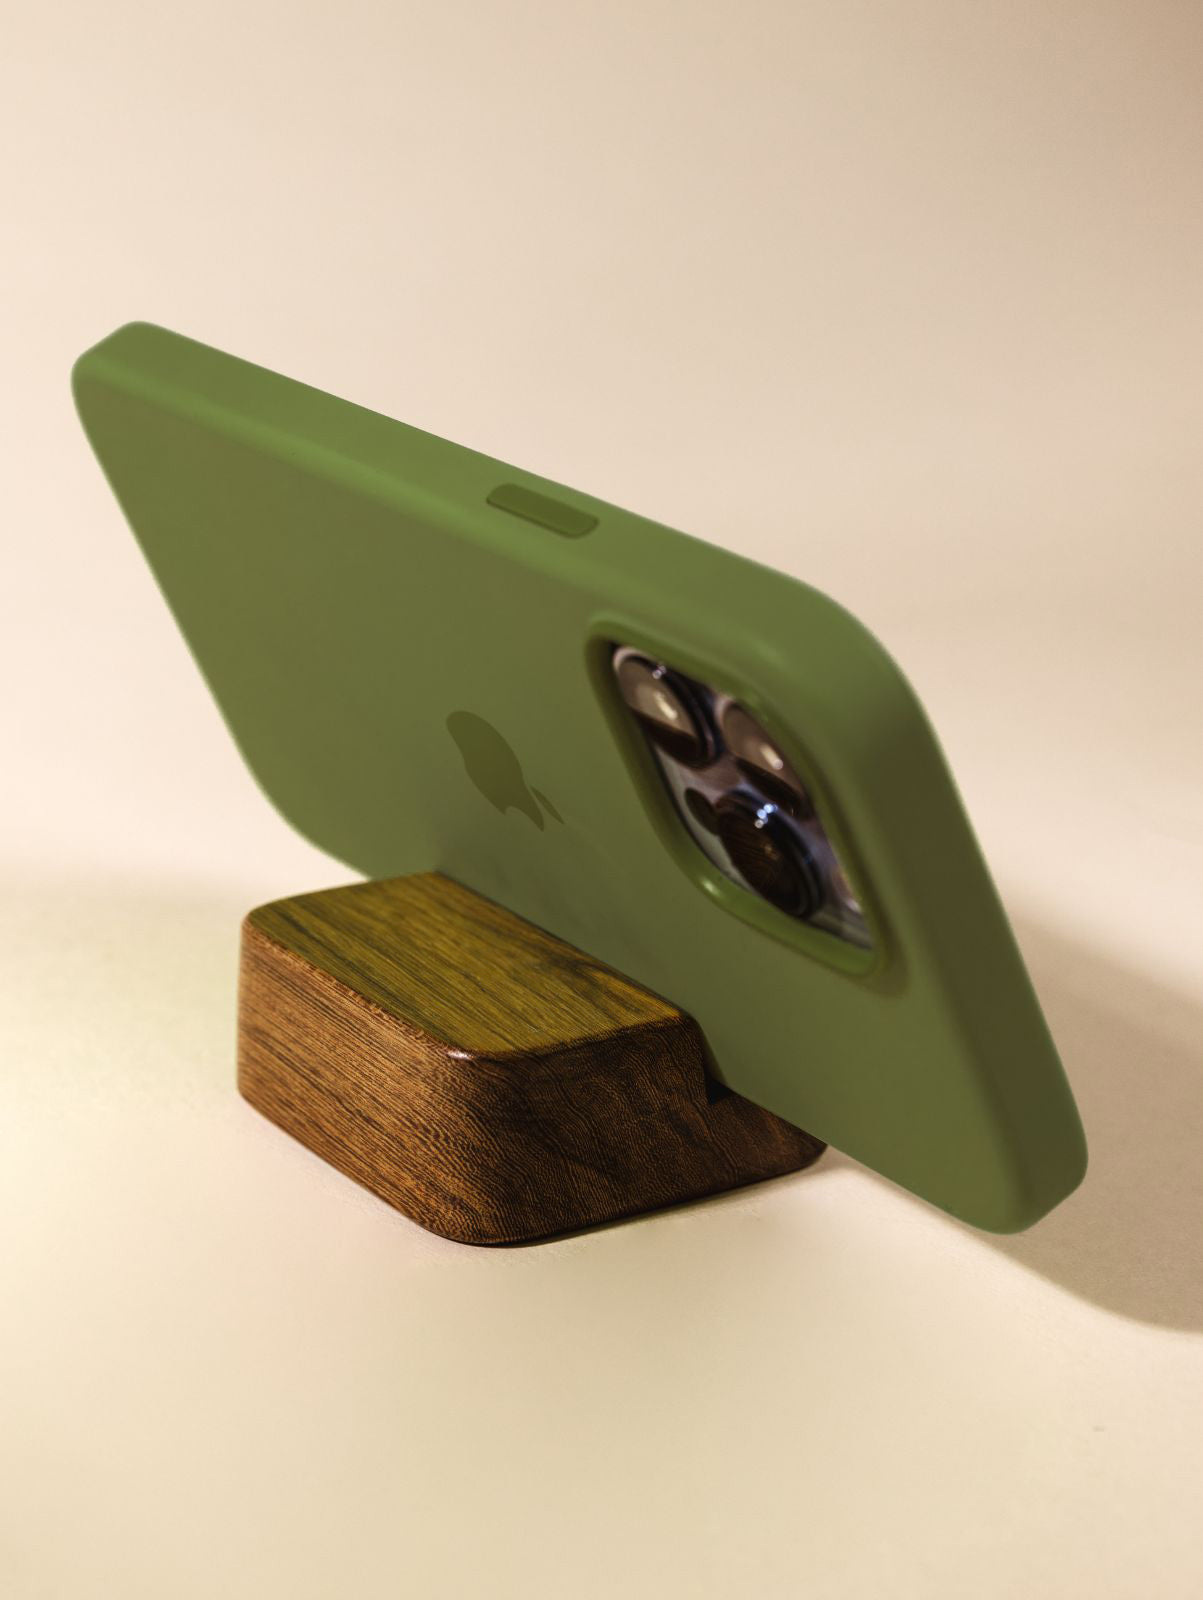 Wooden cell phone stand holding phone horizontally on cream background.